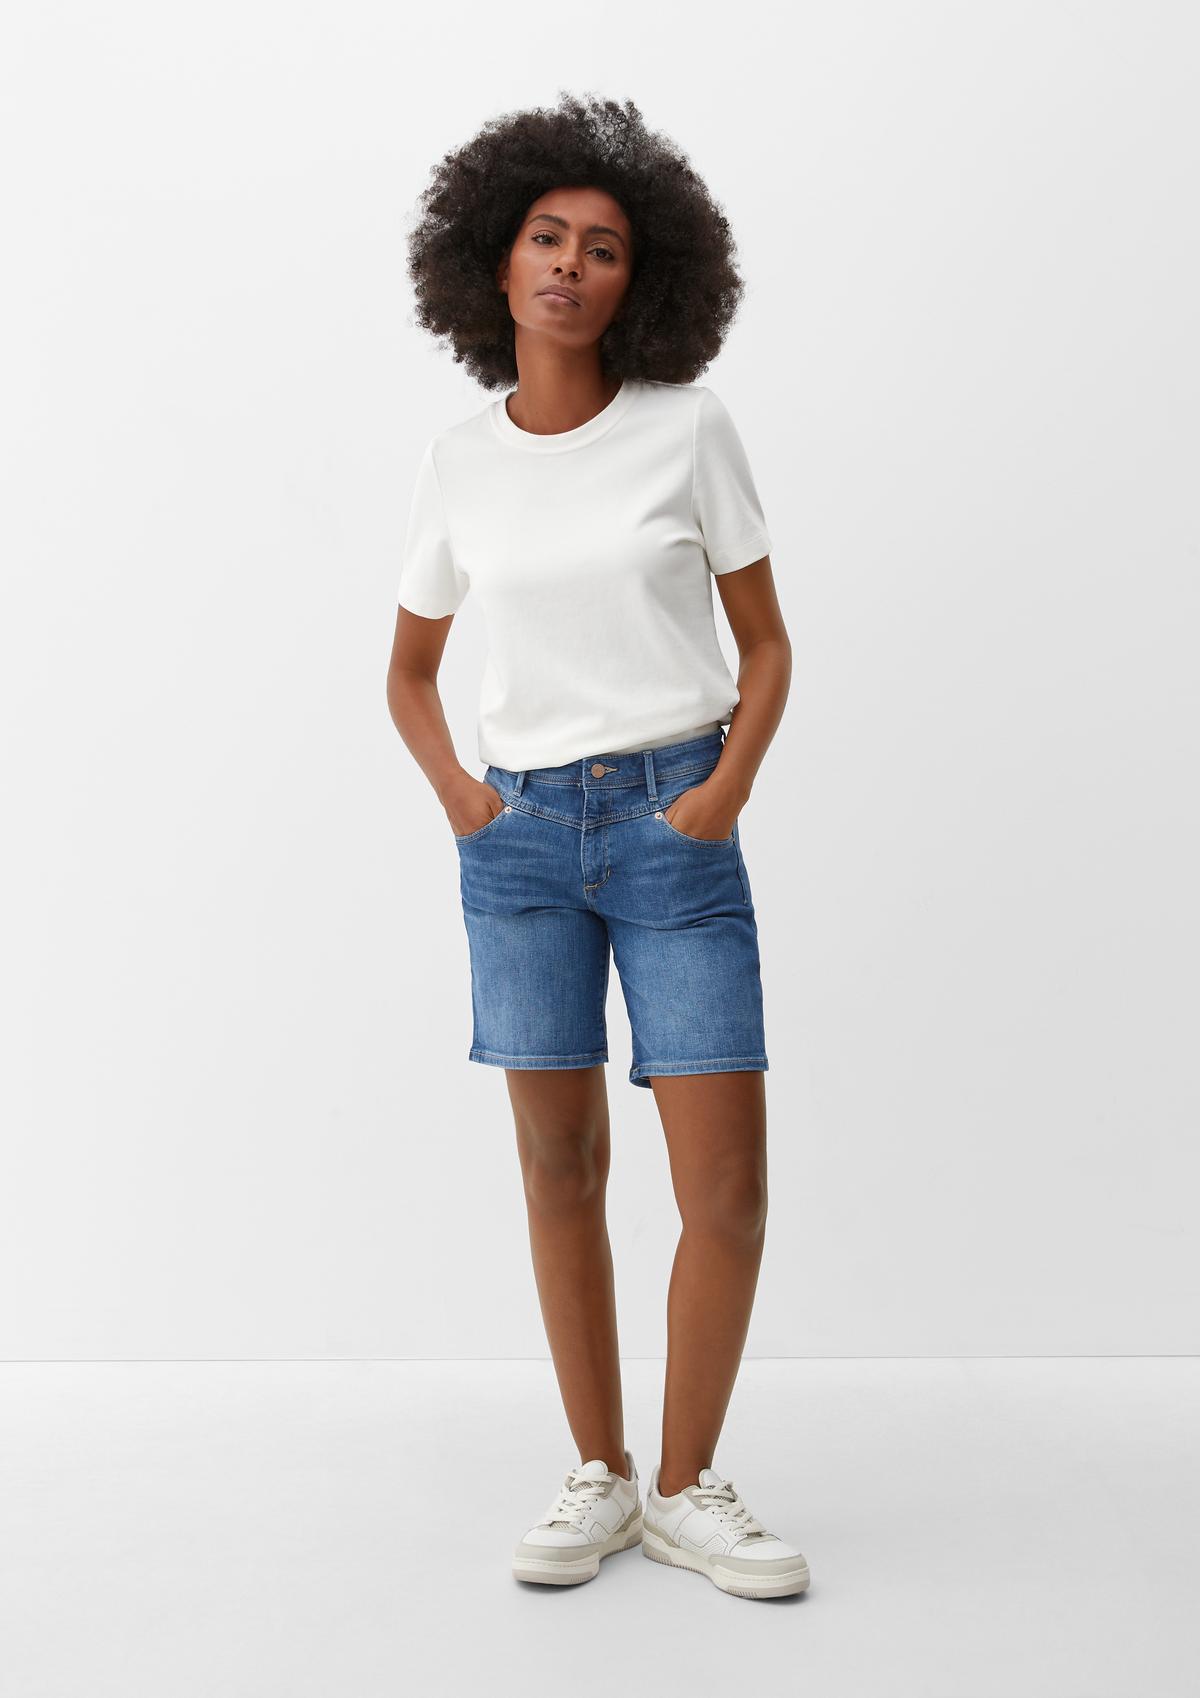 Womens Summer Denim Shorts With Pockets, Casual Washed Short Jeans For  Ladies From Suiyuan99, $42.22